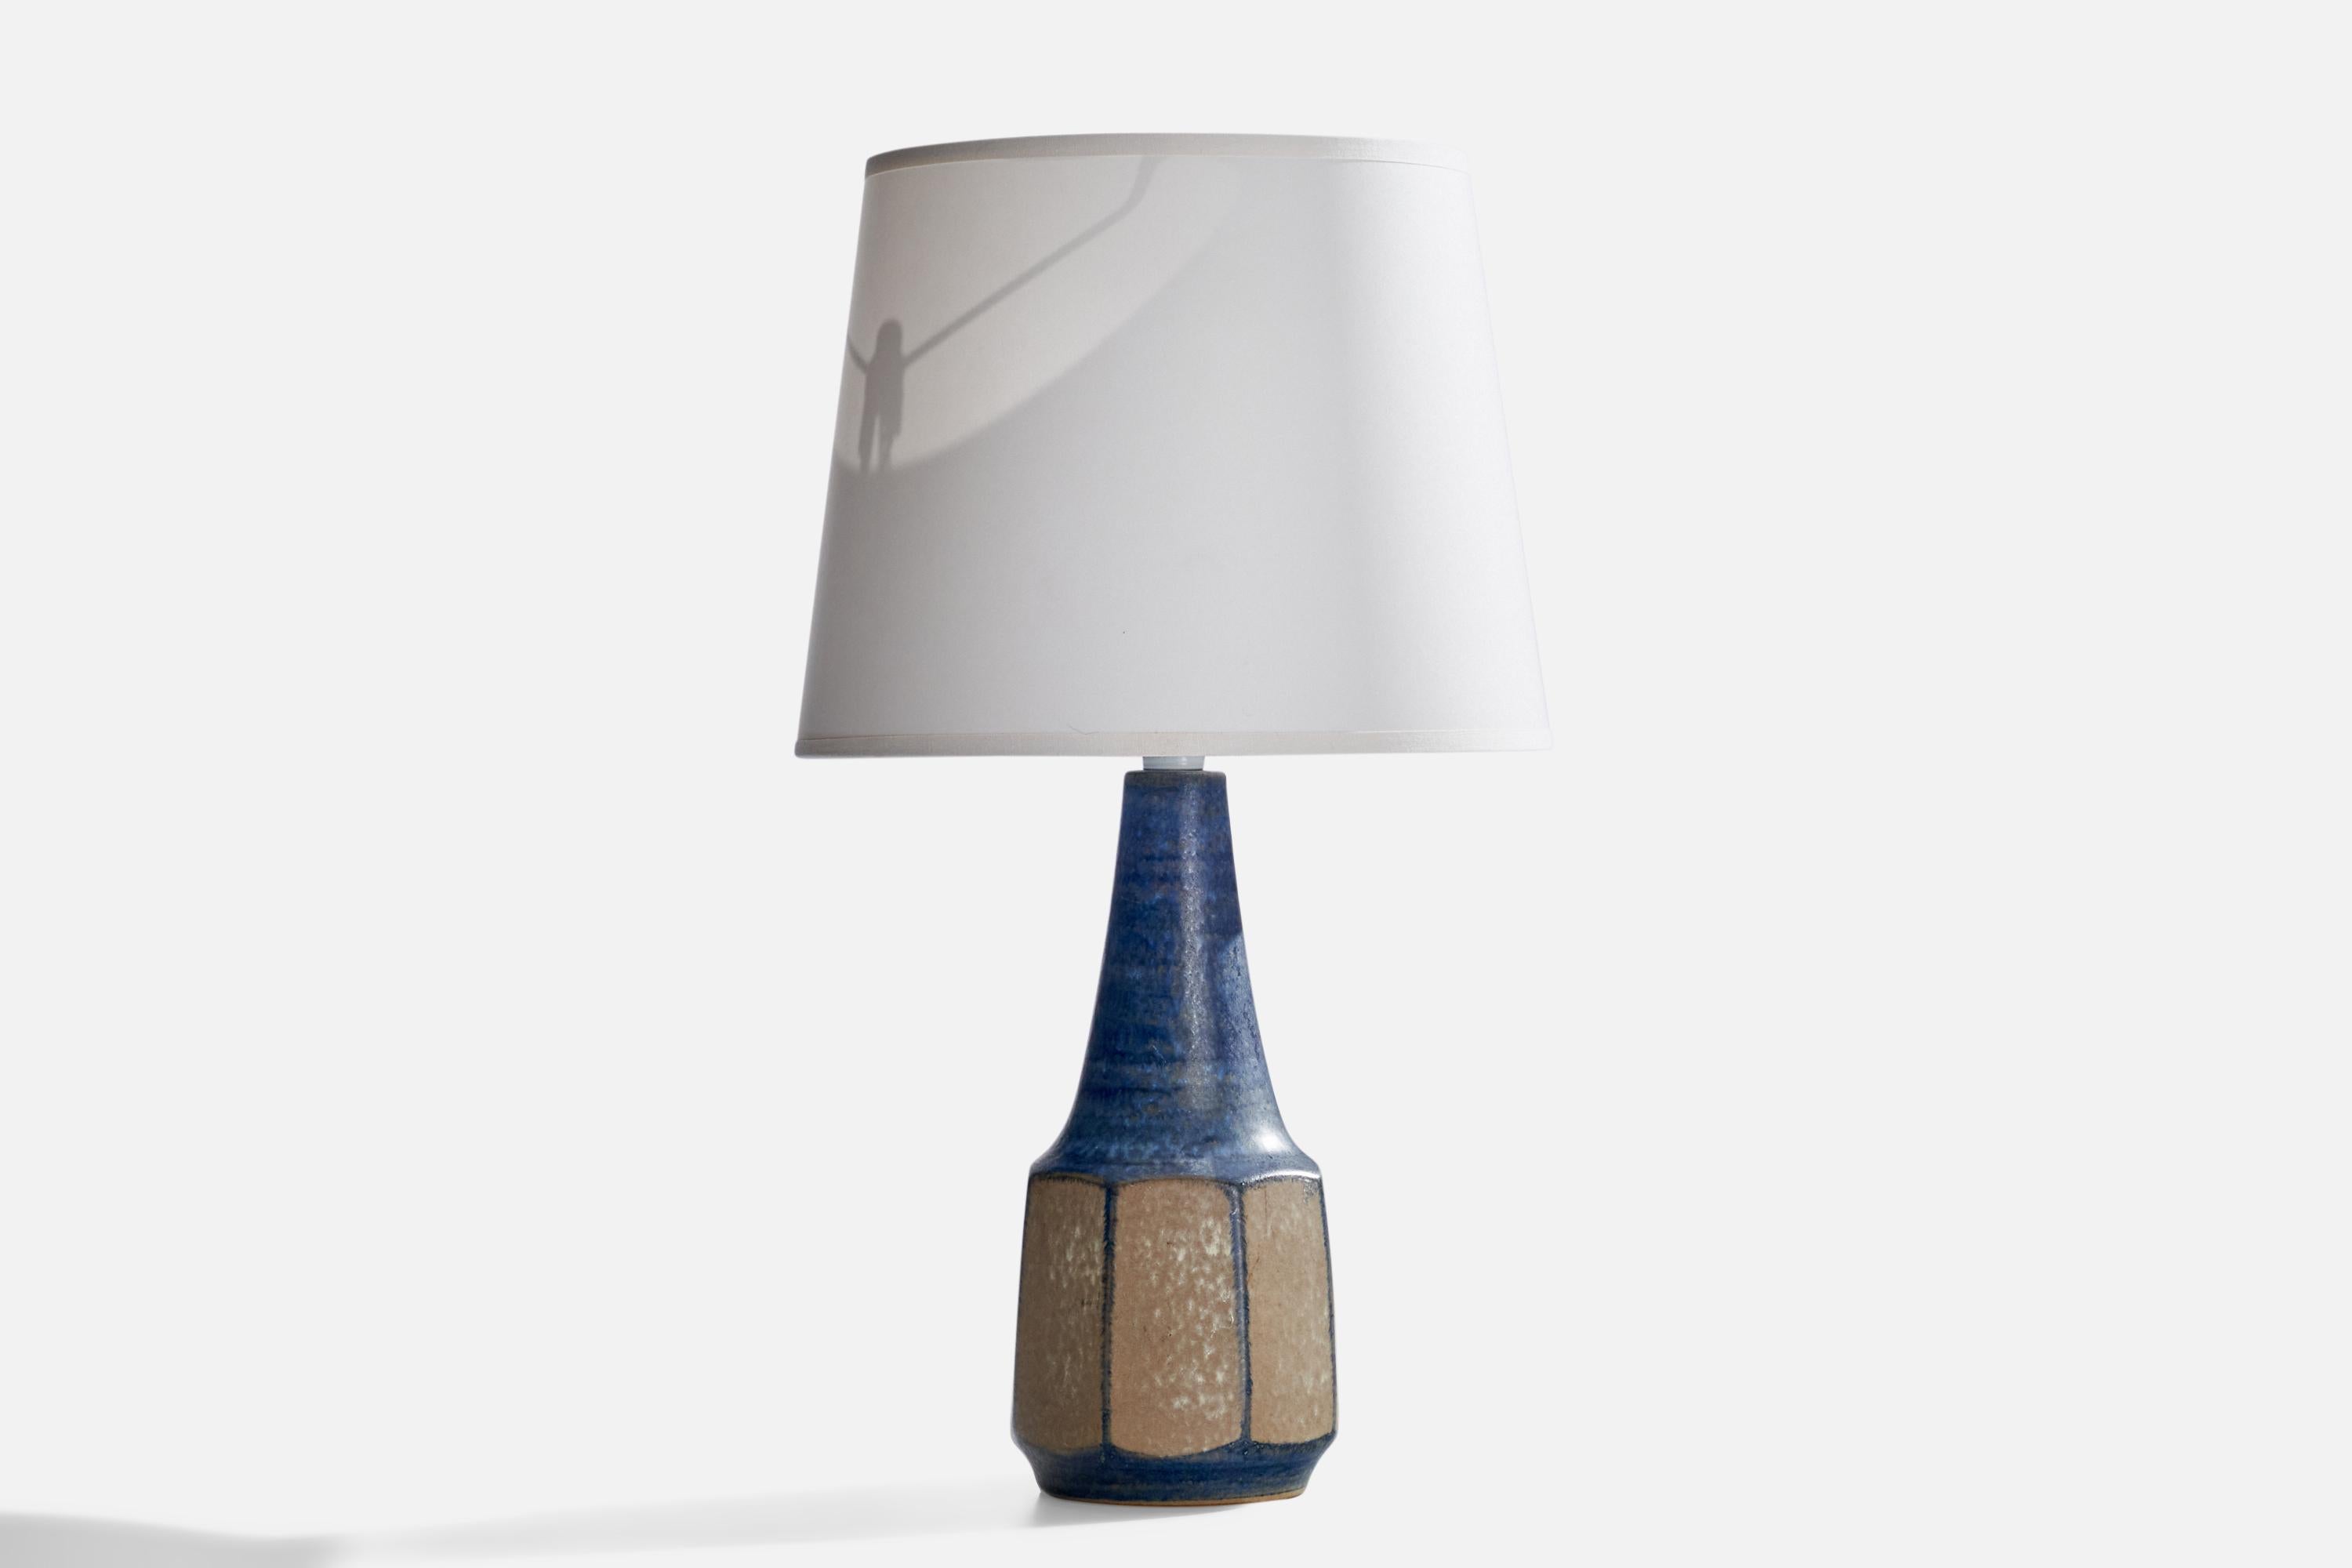 A blue-glazed stoneware table lamp designed by Marianne Starck and produced by Michael Andersen, Bornholm, Denmark, 1960s.

Dimensions of Lamp (inches): 12.25” H x 4.25” Diameter
Dimensions of Shade (inches): 8”  Top Diameter x 10”  Bottom Diameter